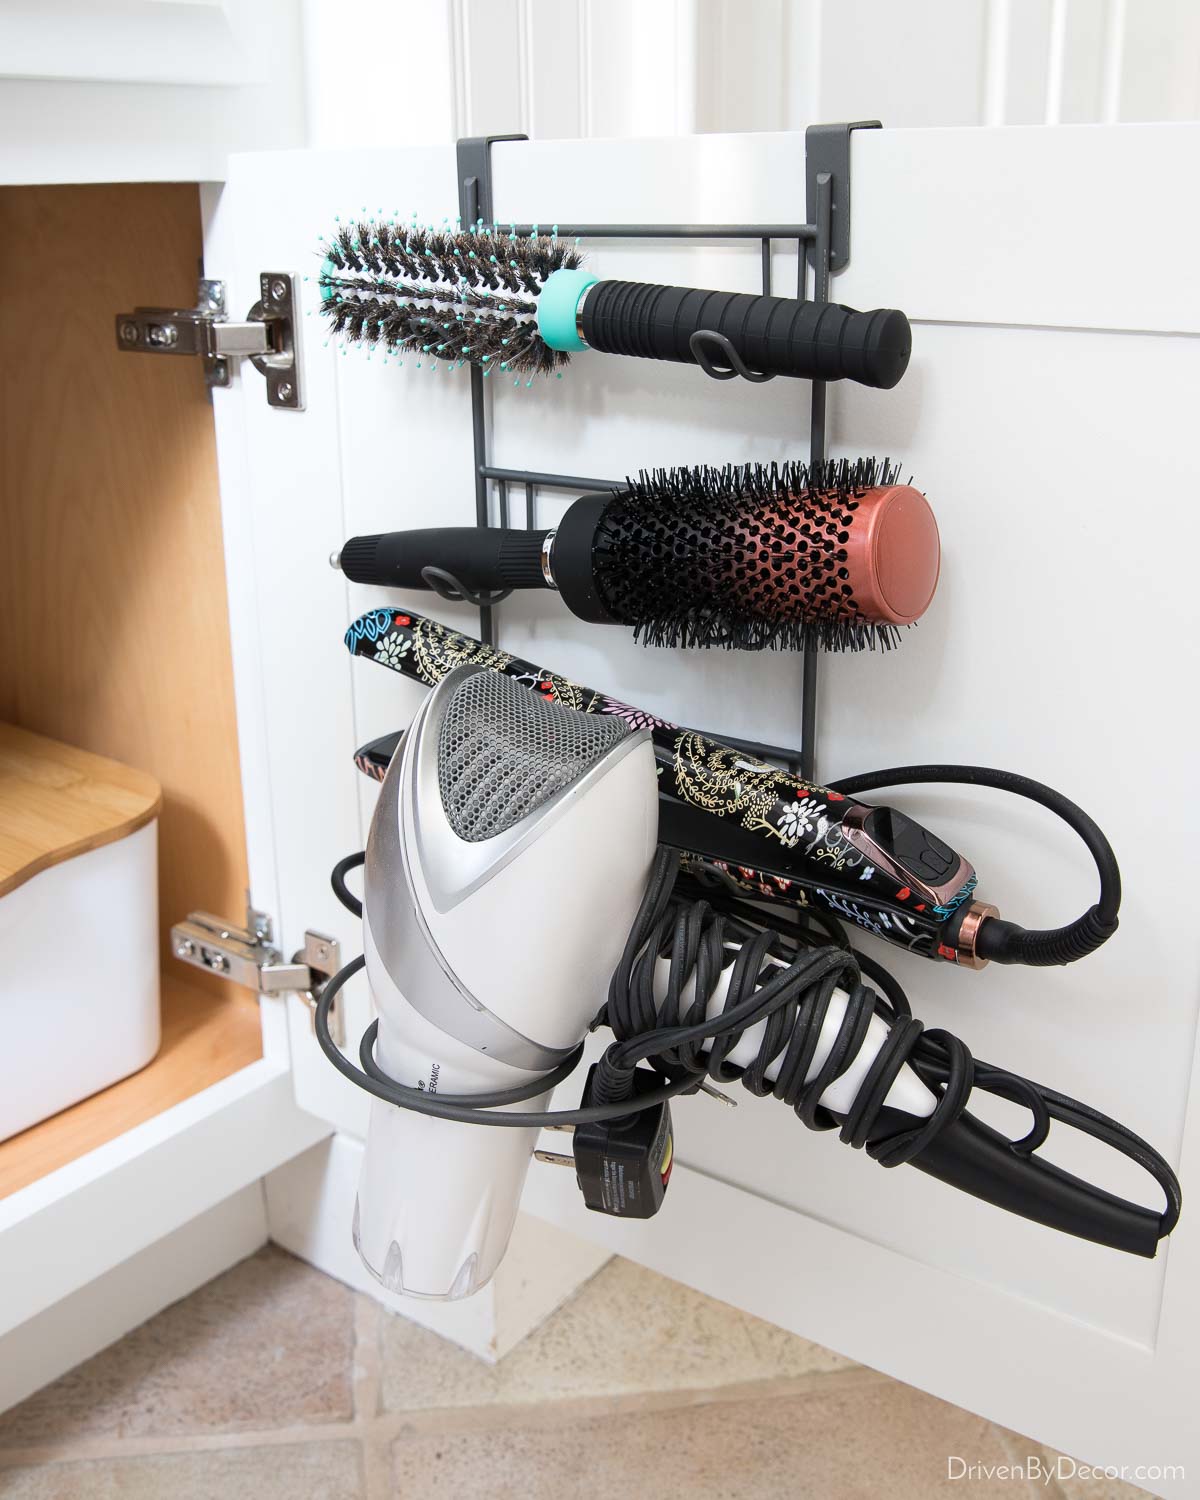 This organizer that hangs on the back of the bathroom cabinet door adds so much storage space!